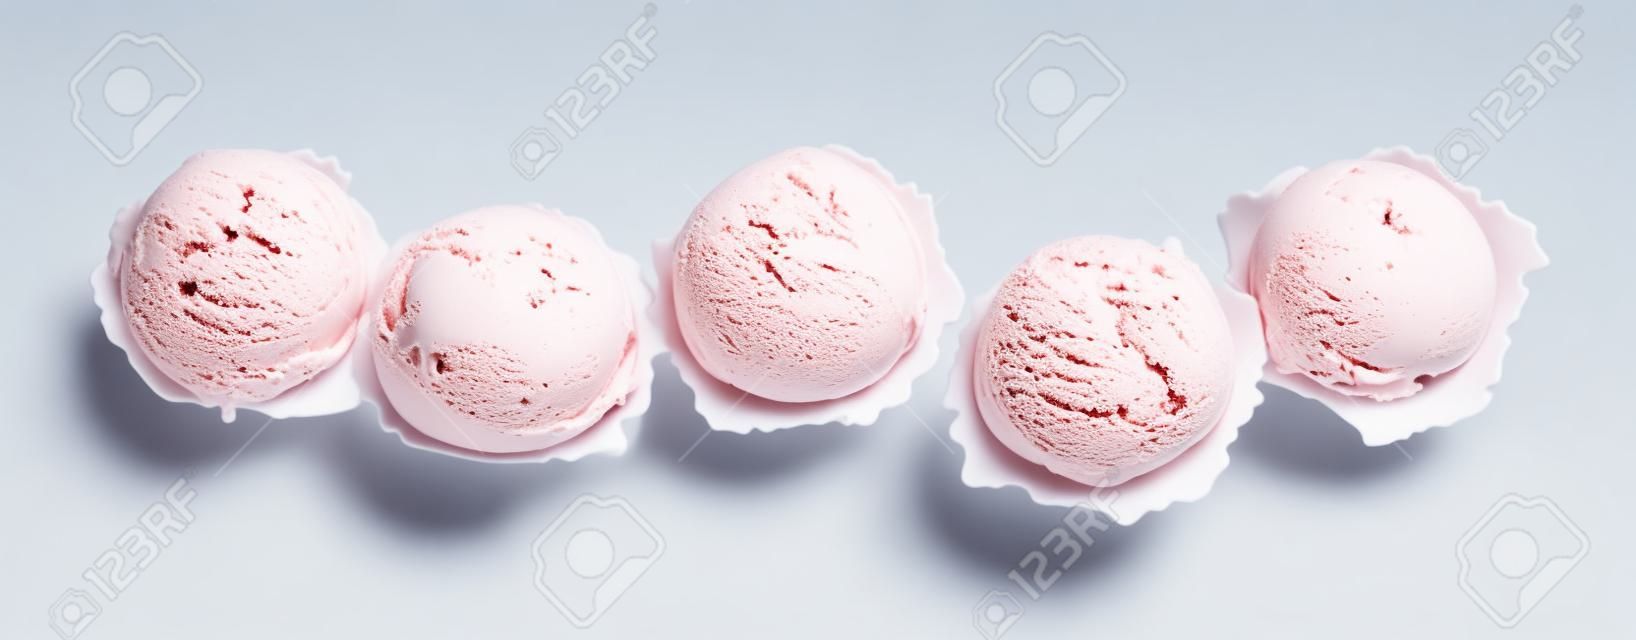 High Angle Still Life View of Five Scoops of Colorful and Refreshingly Cool Ice Cream in front of White Background